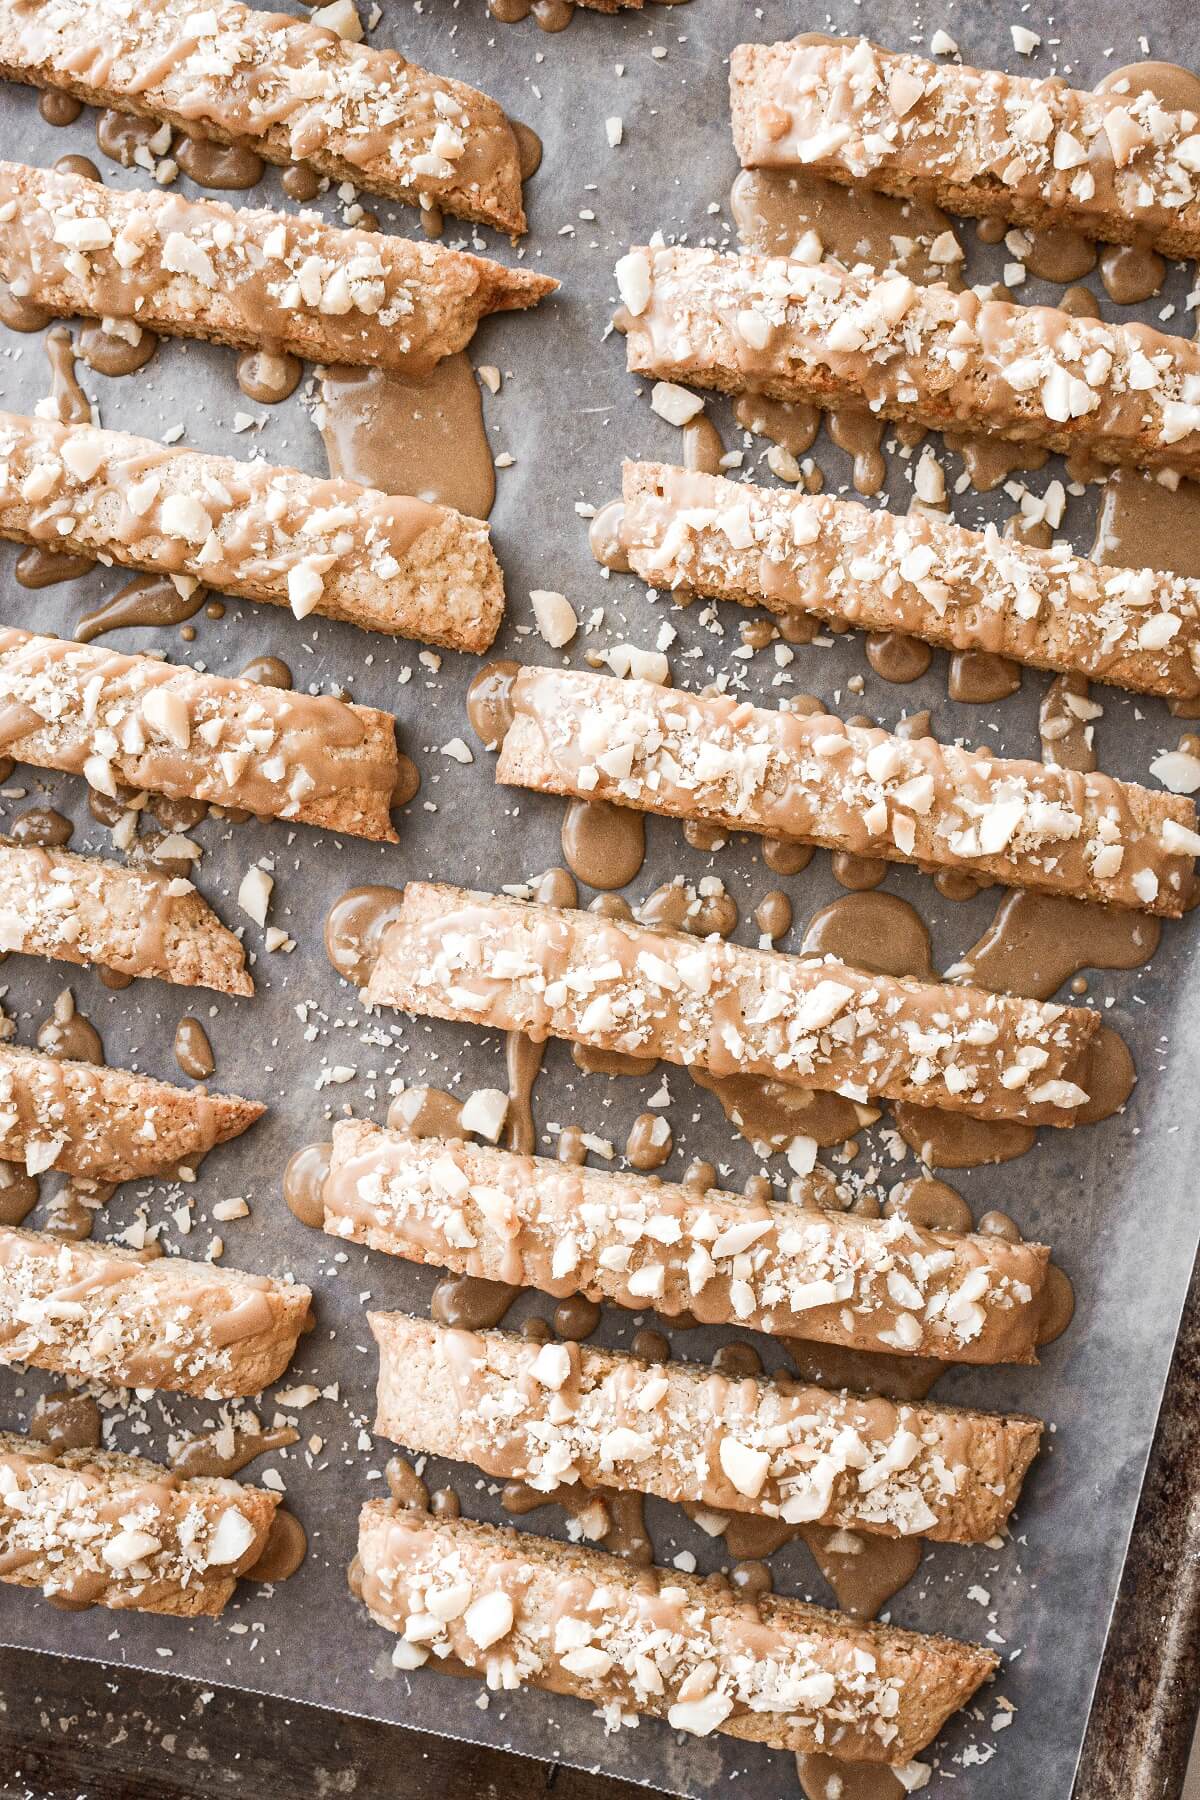 Maple biscotti drizzled with icing and sprinkled with chopped macadamia nuts.